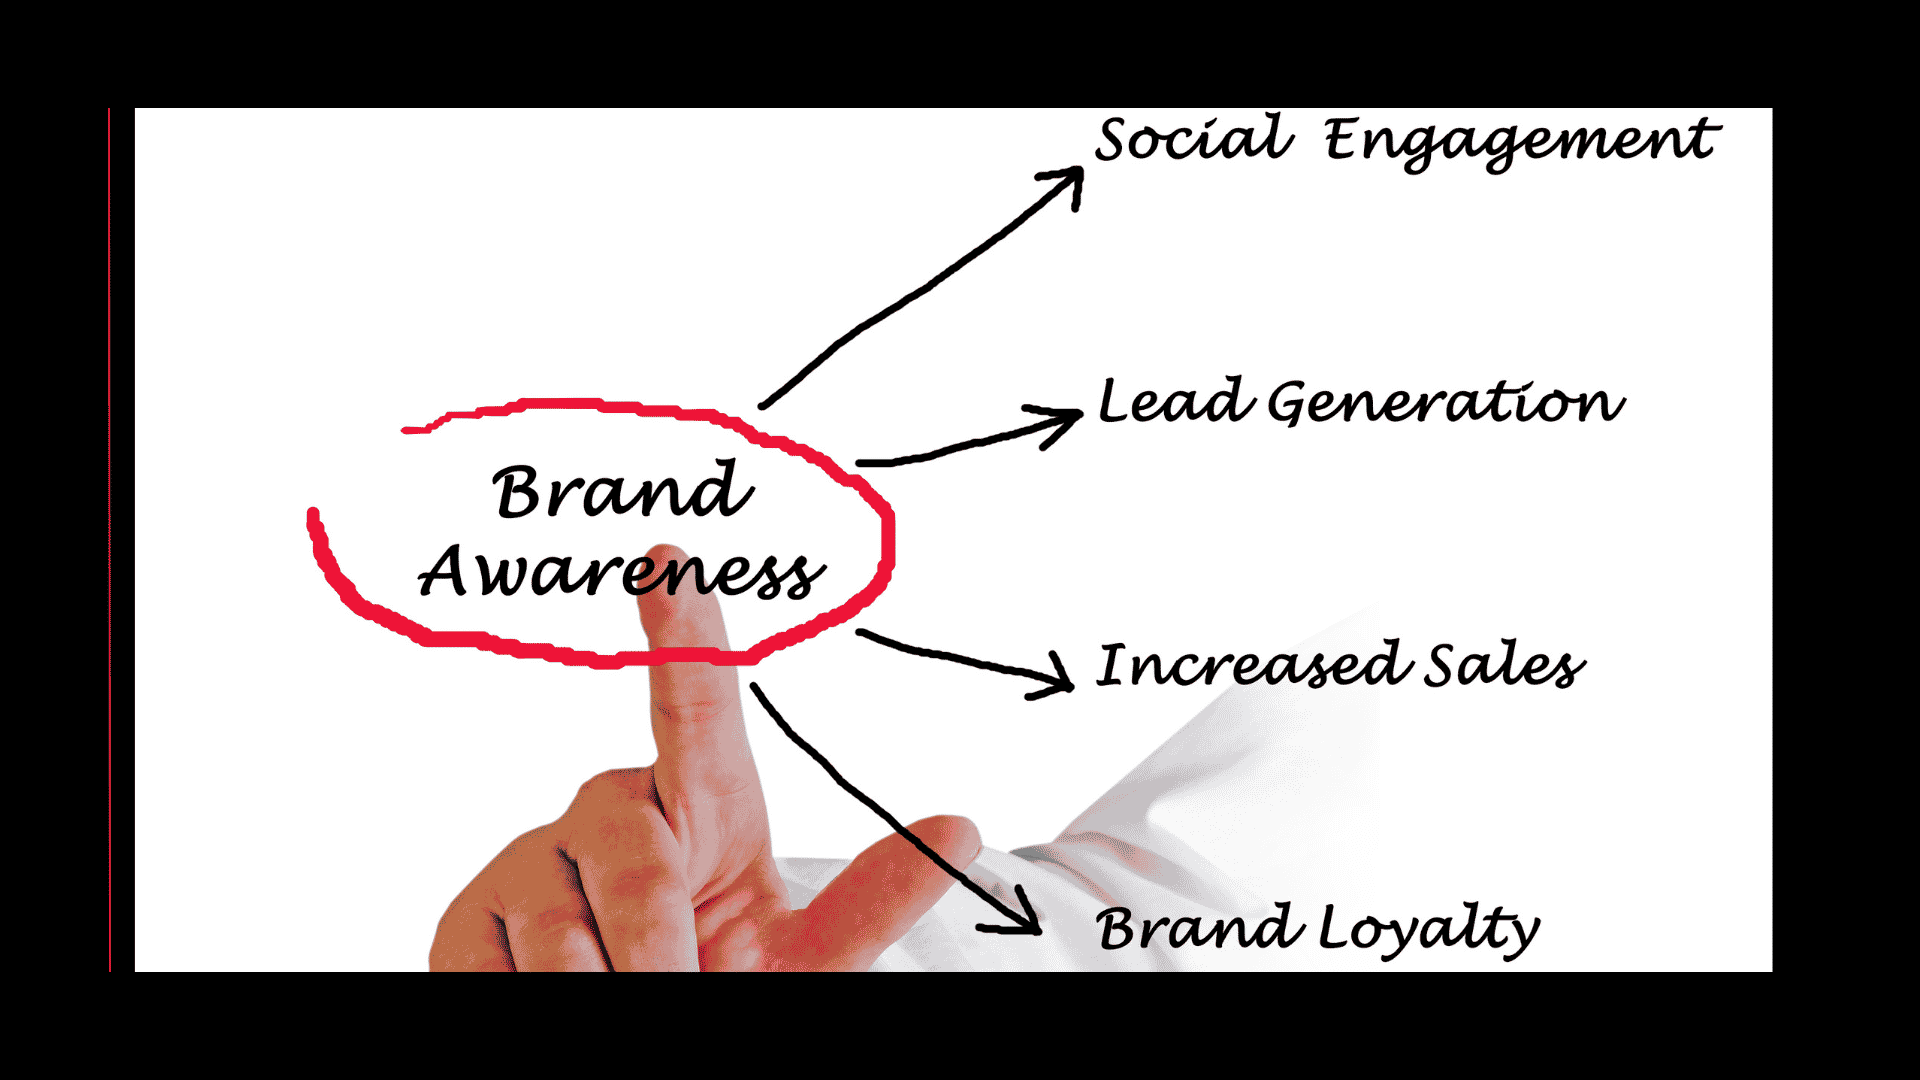 Brand awareness is at the top of the marketing funnel and drives people to deeper levels of the funnel